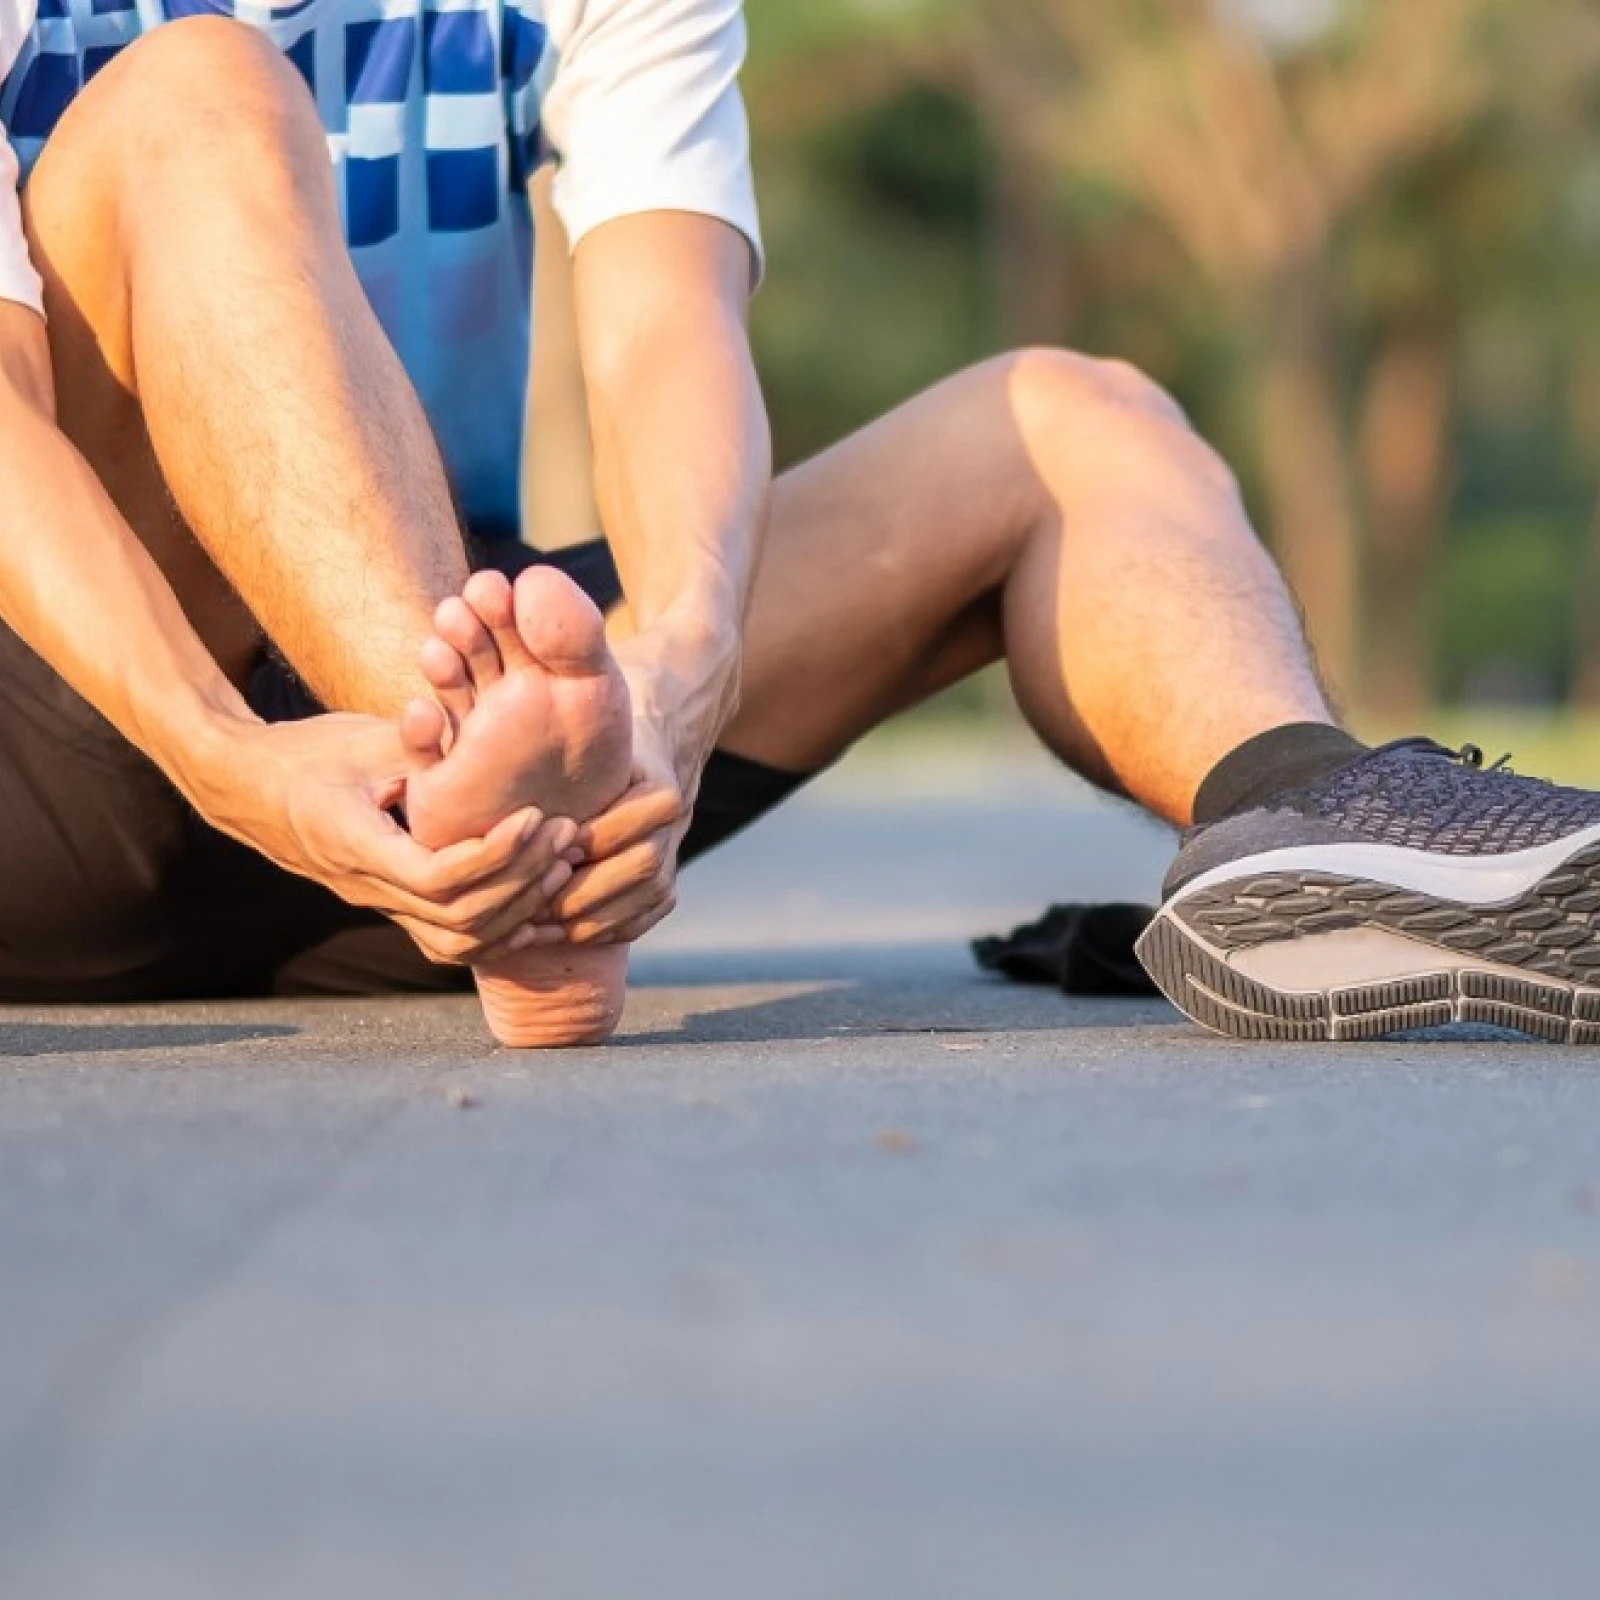 3 Common Causes of Foot Pain from Running